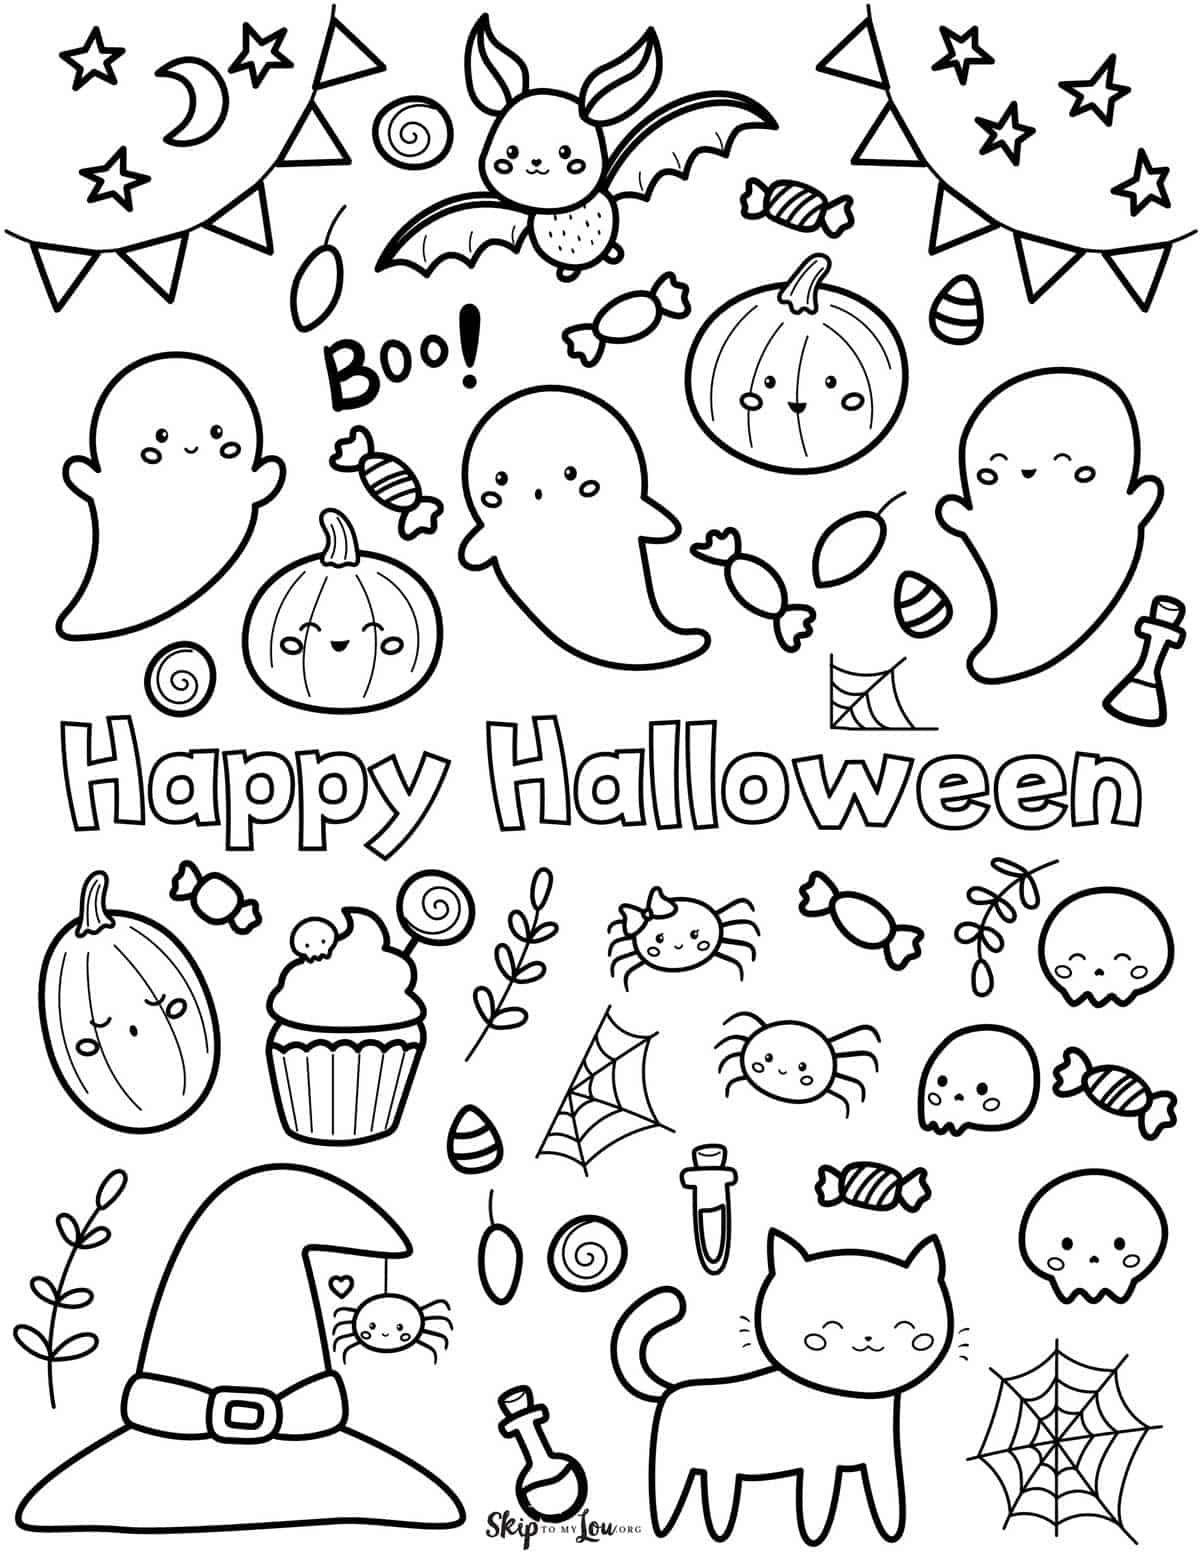 Cute halloween coloring pages to print and color halloween coloring cute halloween drawings halloween coloring pages